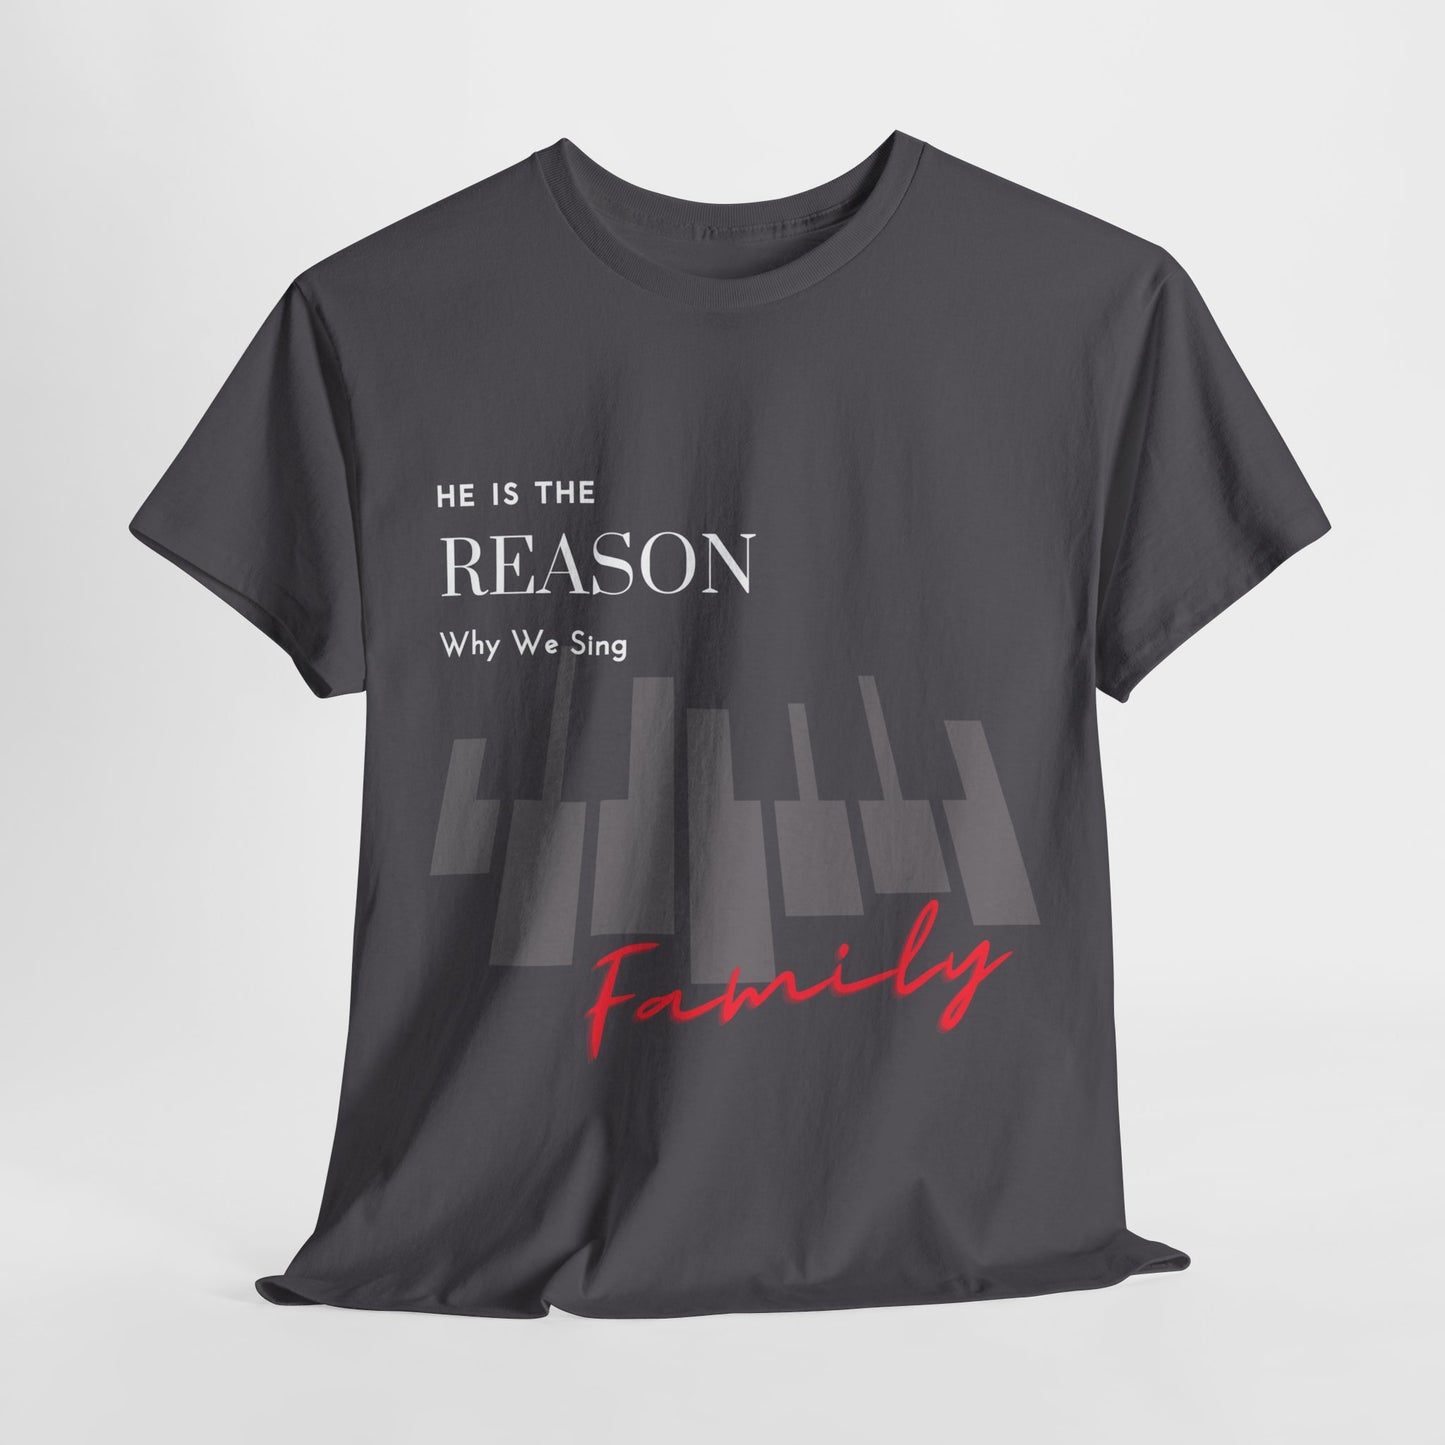 "He Is the Reason Why We Sing" Unisex Tee